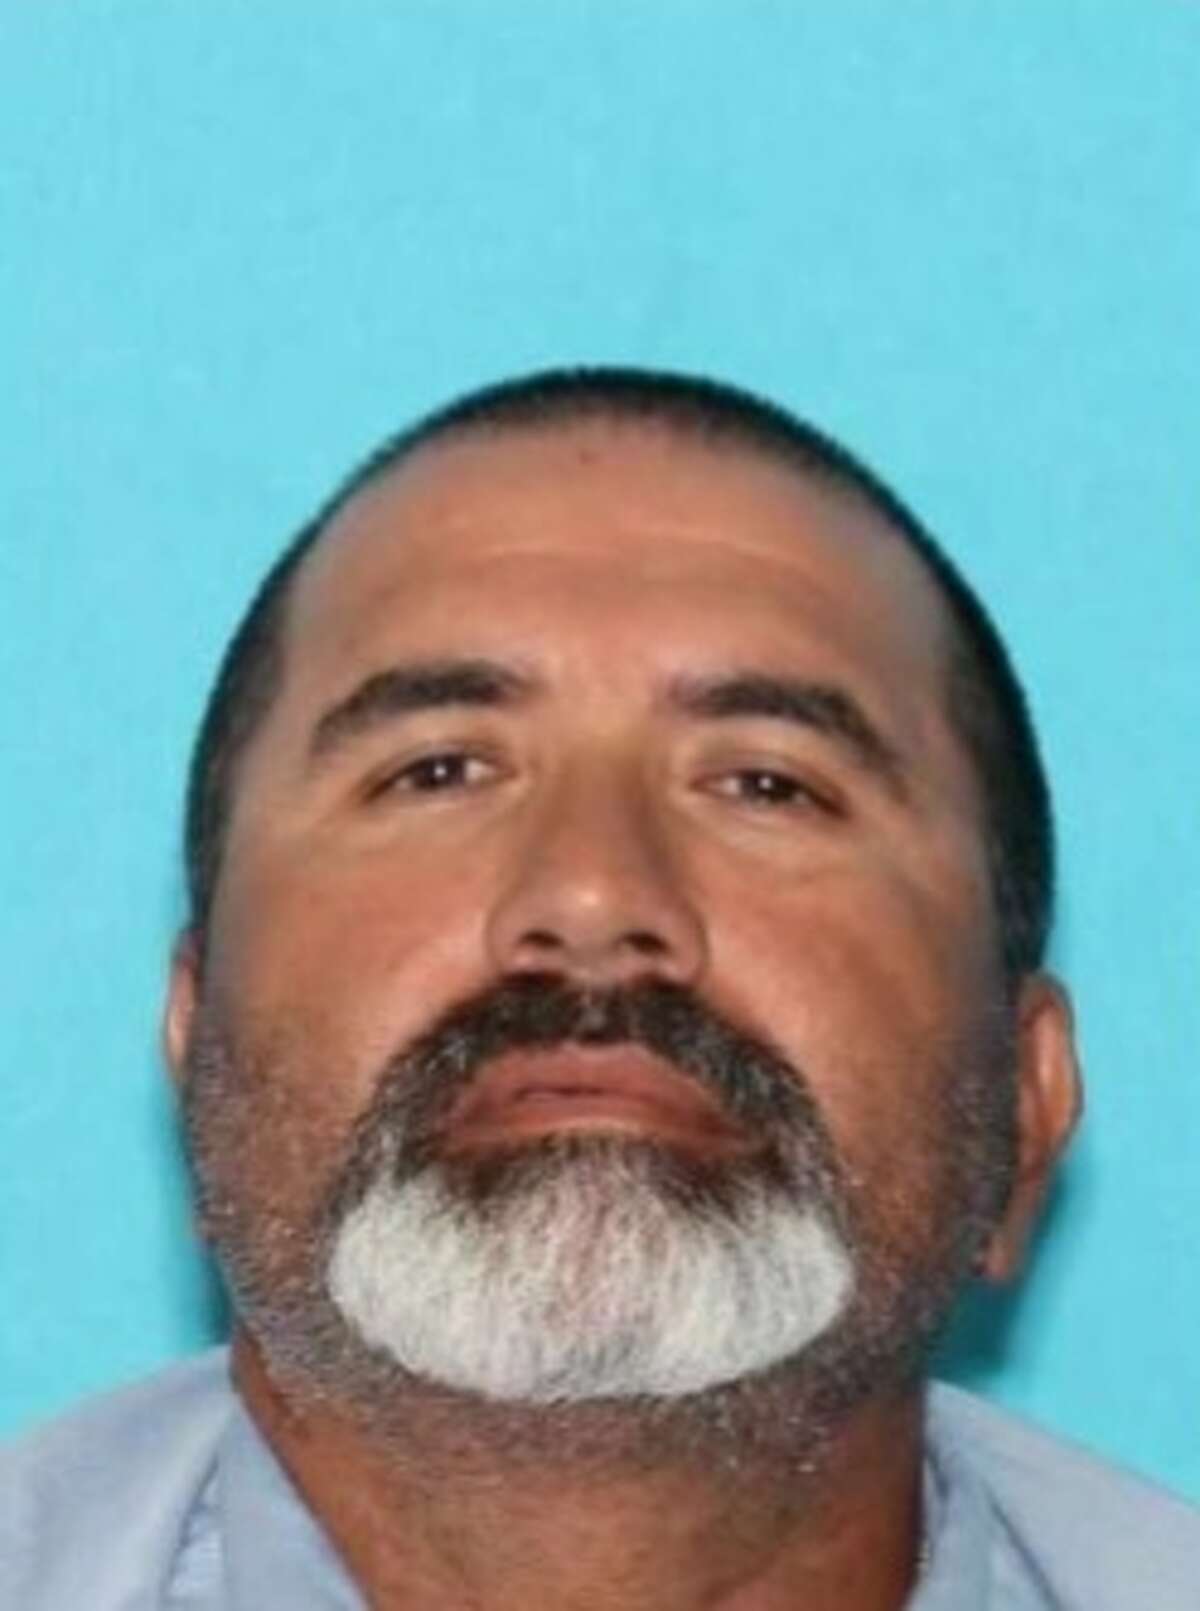 Kendall County select softball coach Danny C. Perez, 49, has been charged of sexually assaulting a 17-year-old female that he coached while the team was away for a tournament in Houston in November. The Bombers, the select team, practices at Boerne-Samael V. Champion High School.